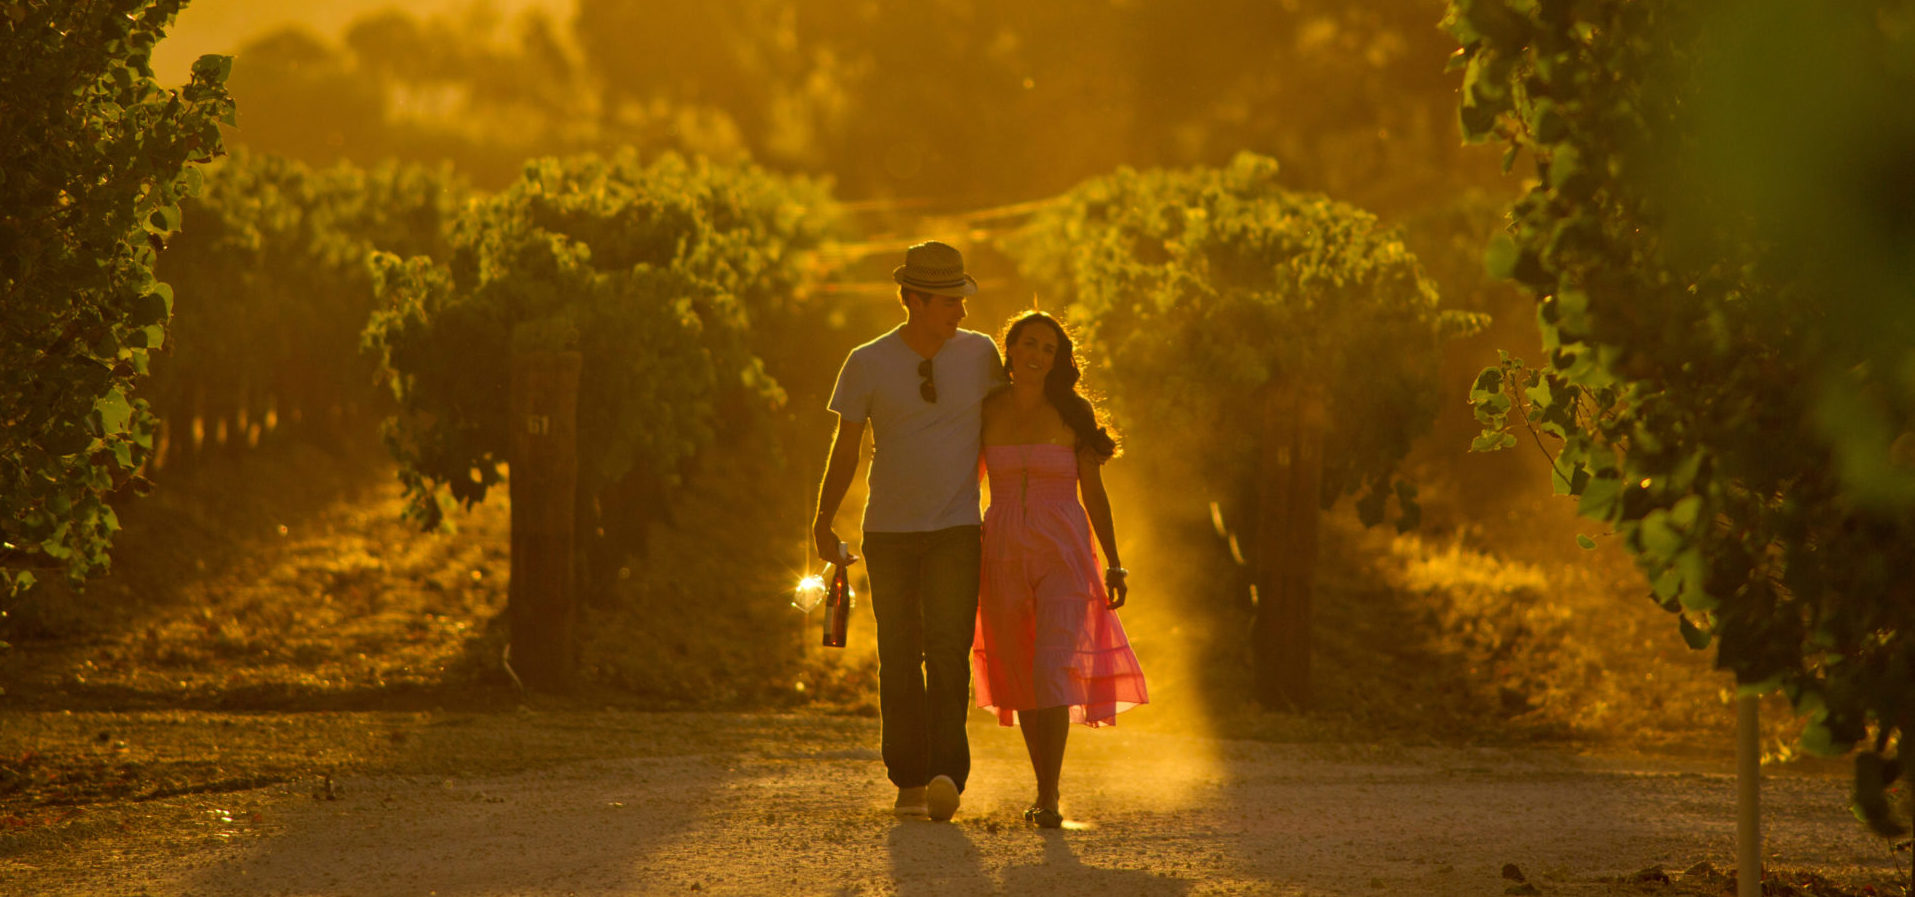 Couple walking through a vineyard with a bottle of wine.